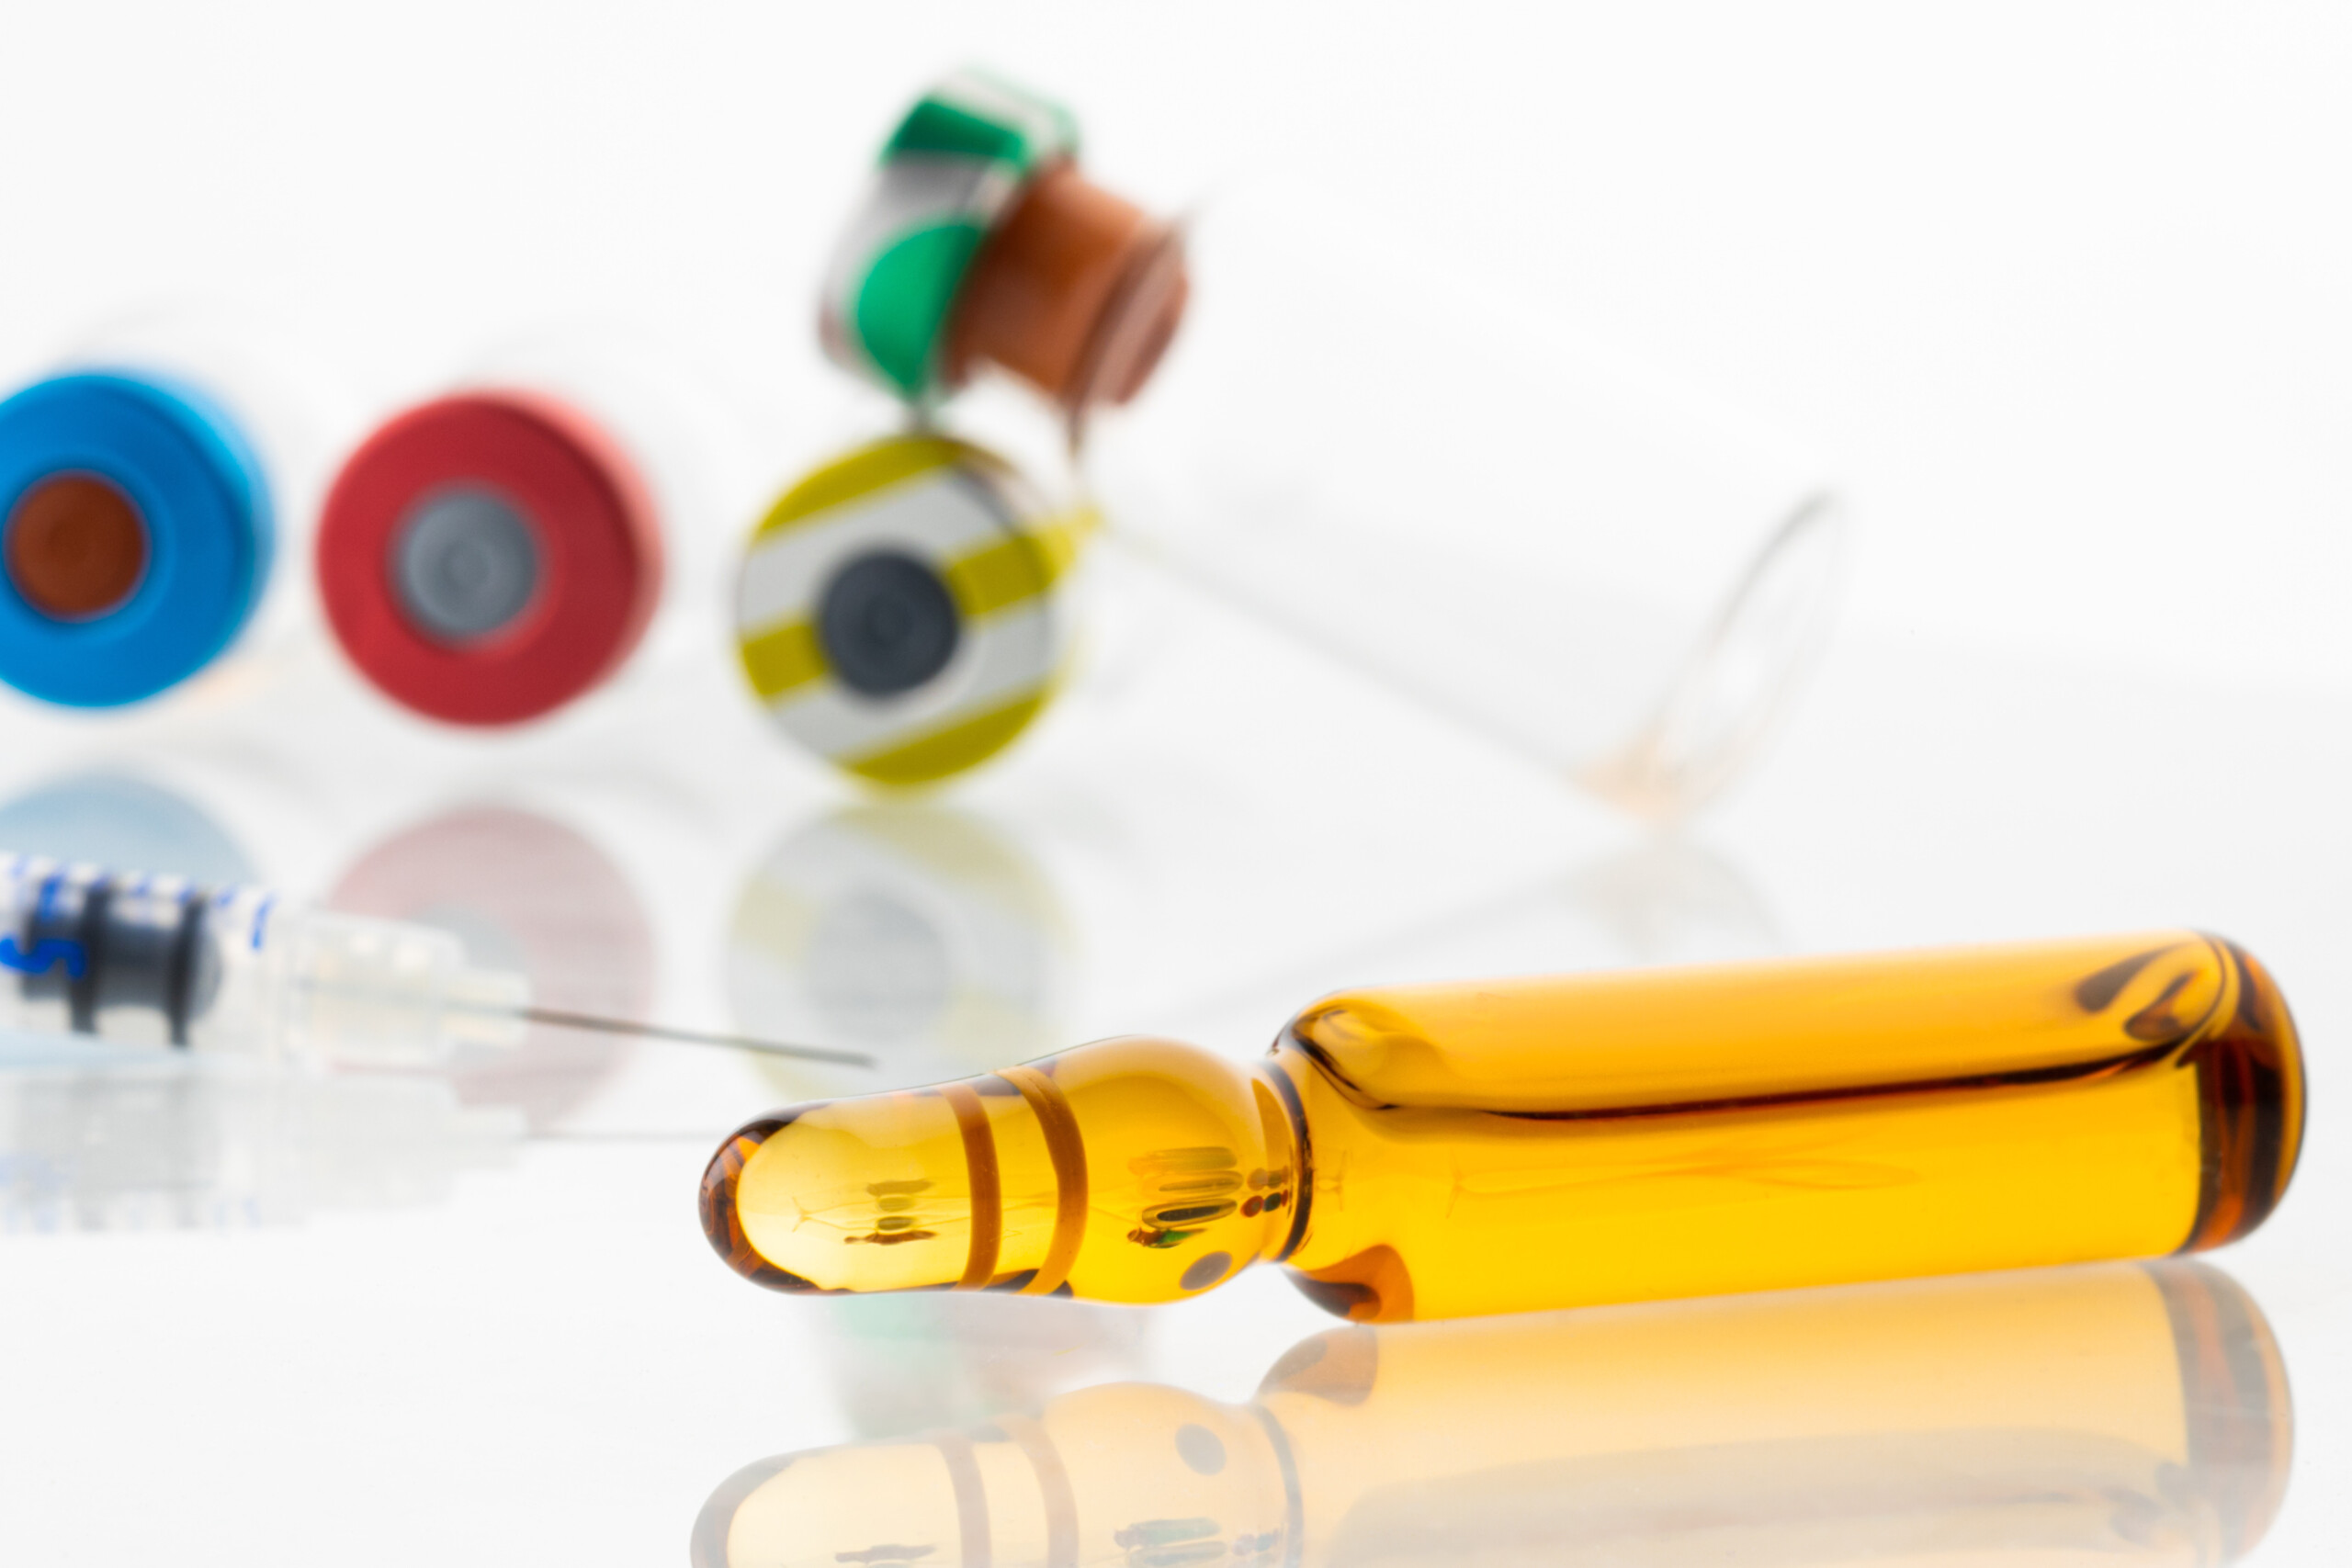 Ampoules for an injection treatment